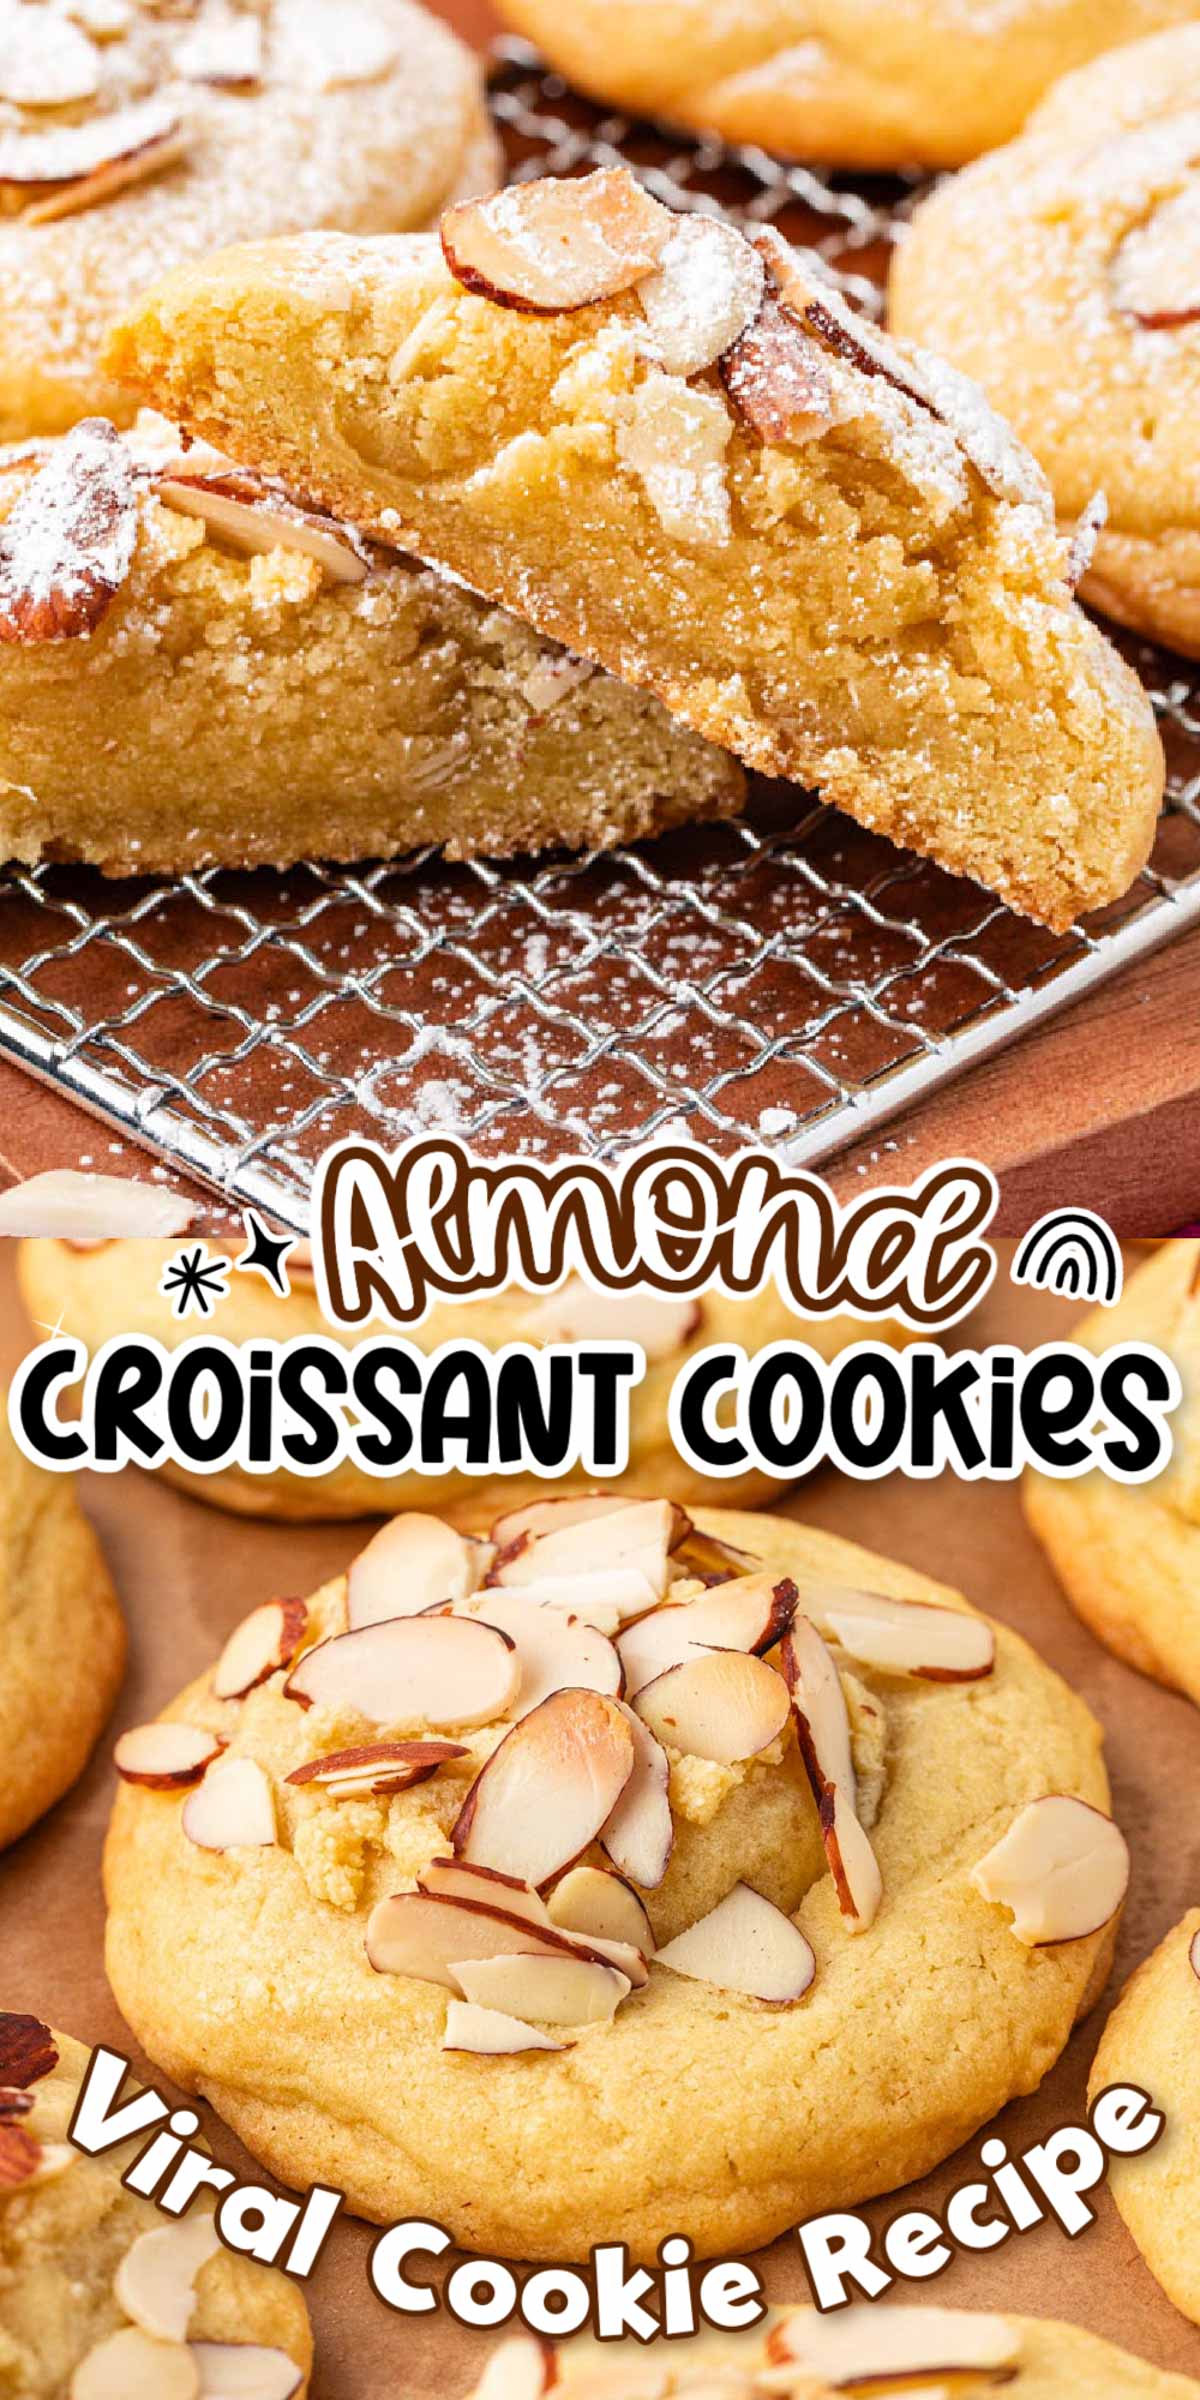 Almond croissant lovers take notice of these Almond Croissant Cookies that broke the internet! All that buttery, sweet almond flavor shines in these bakery-level cookies that are stuffed with an easy, creamy frangipane filling! via @sugarandsoulco